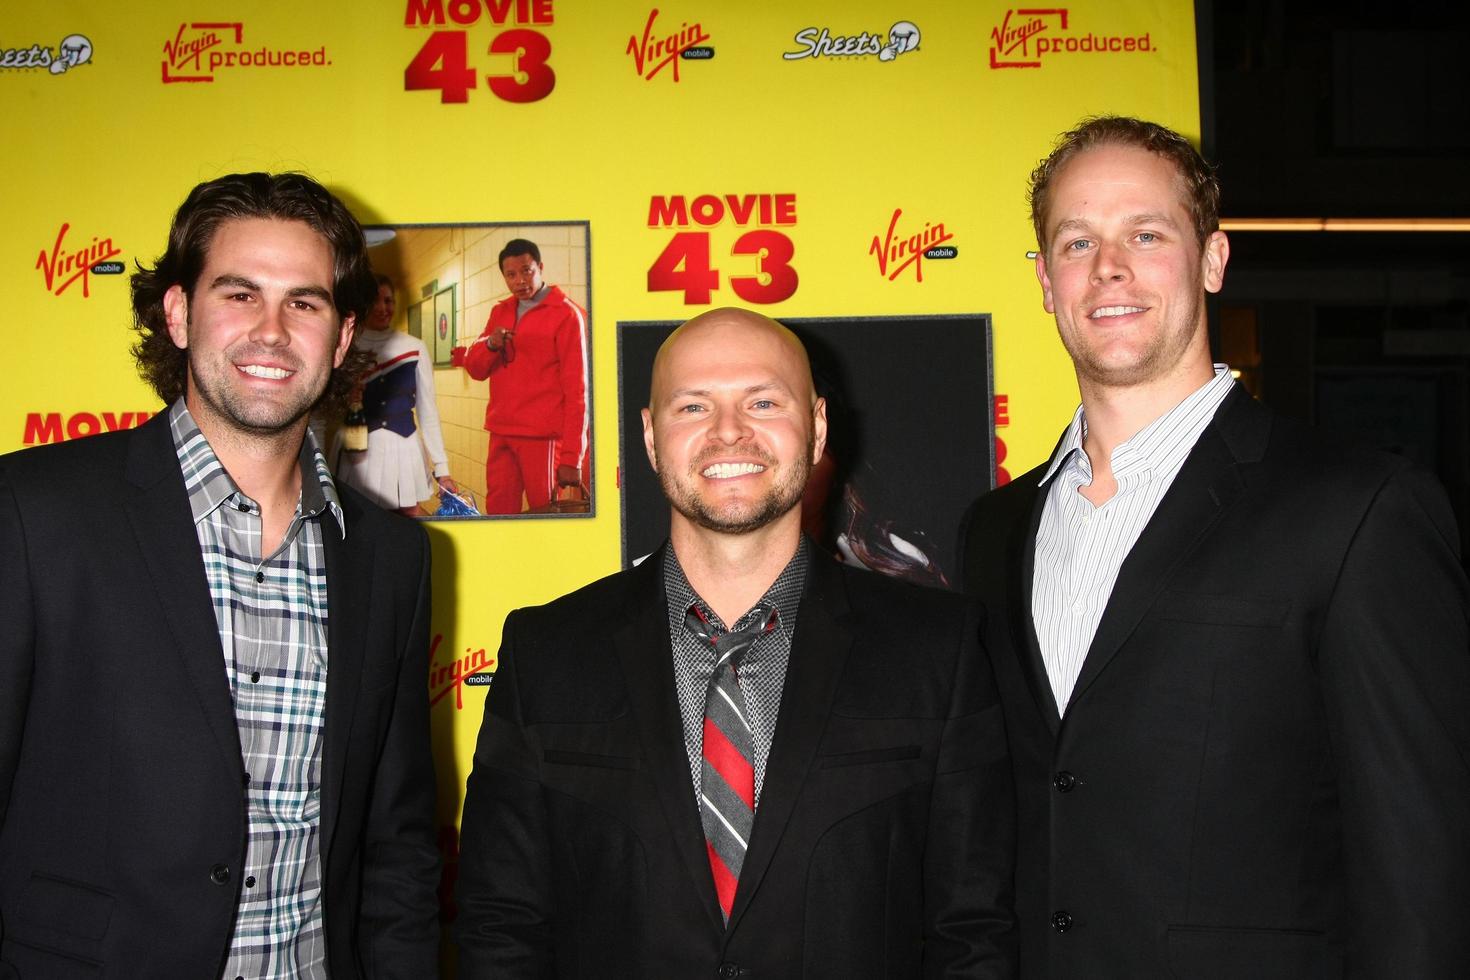 LOS ANGELES, JAN 23 - Justin Morneau, Cody Ross, arrives at the Movie 43 Los Angeles Premiere at Chinese Theater on January 23, 2013 in Los Angeles, CA photo